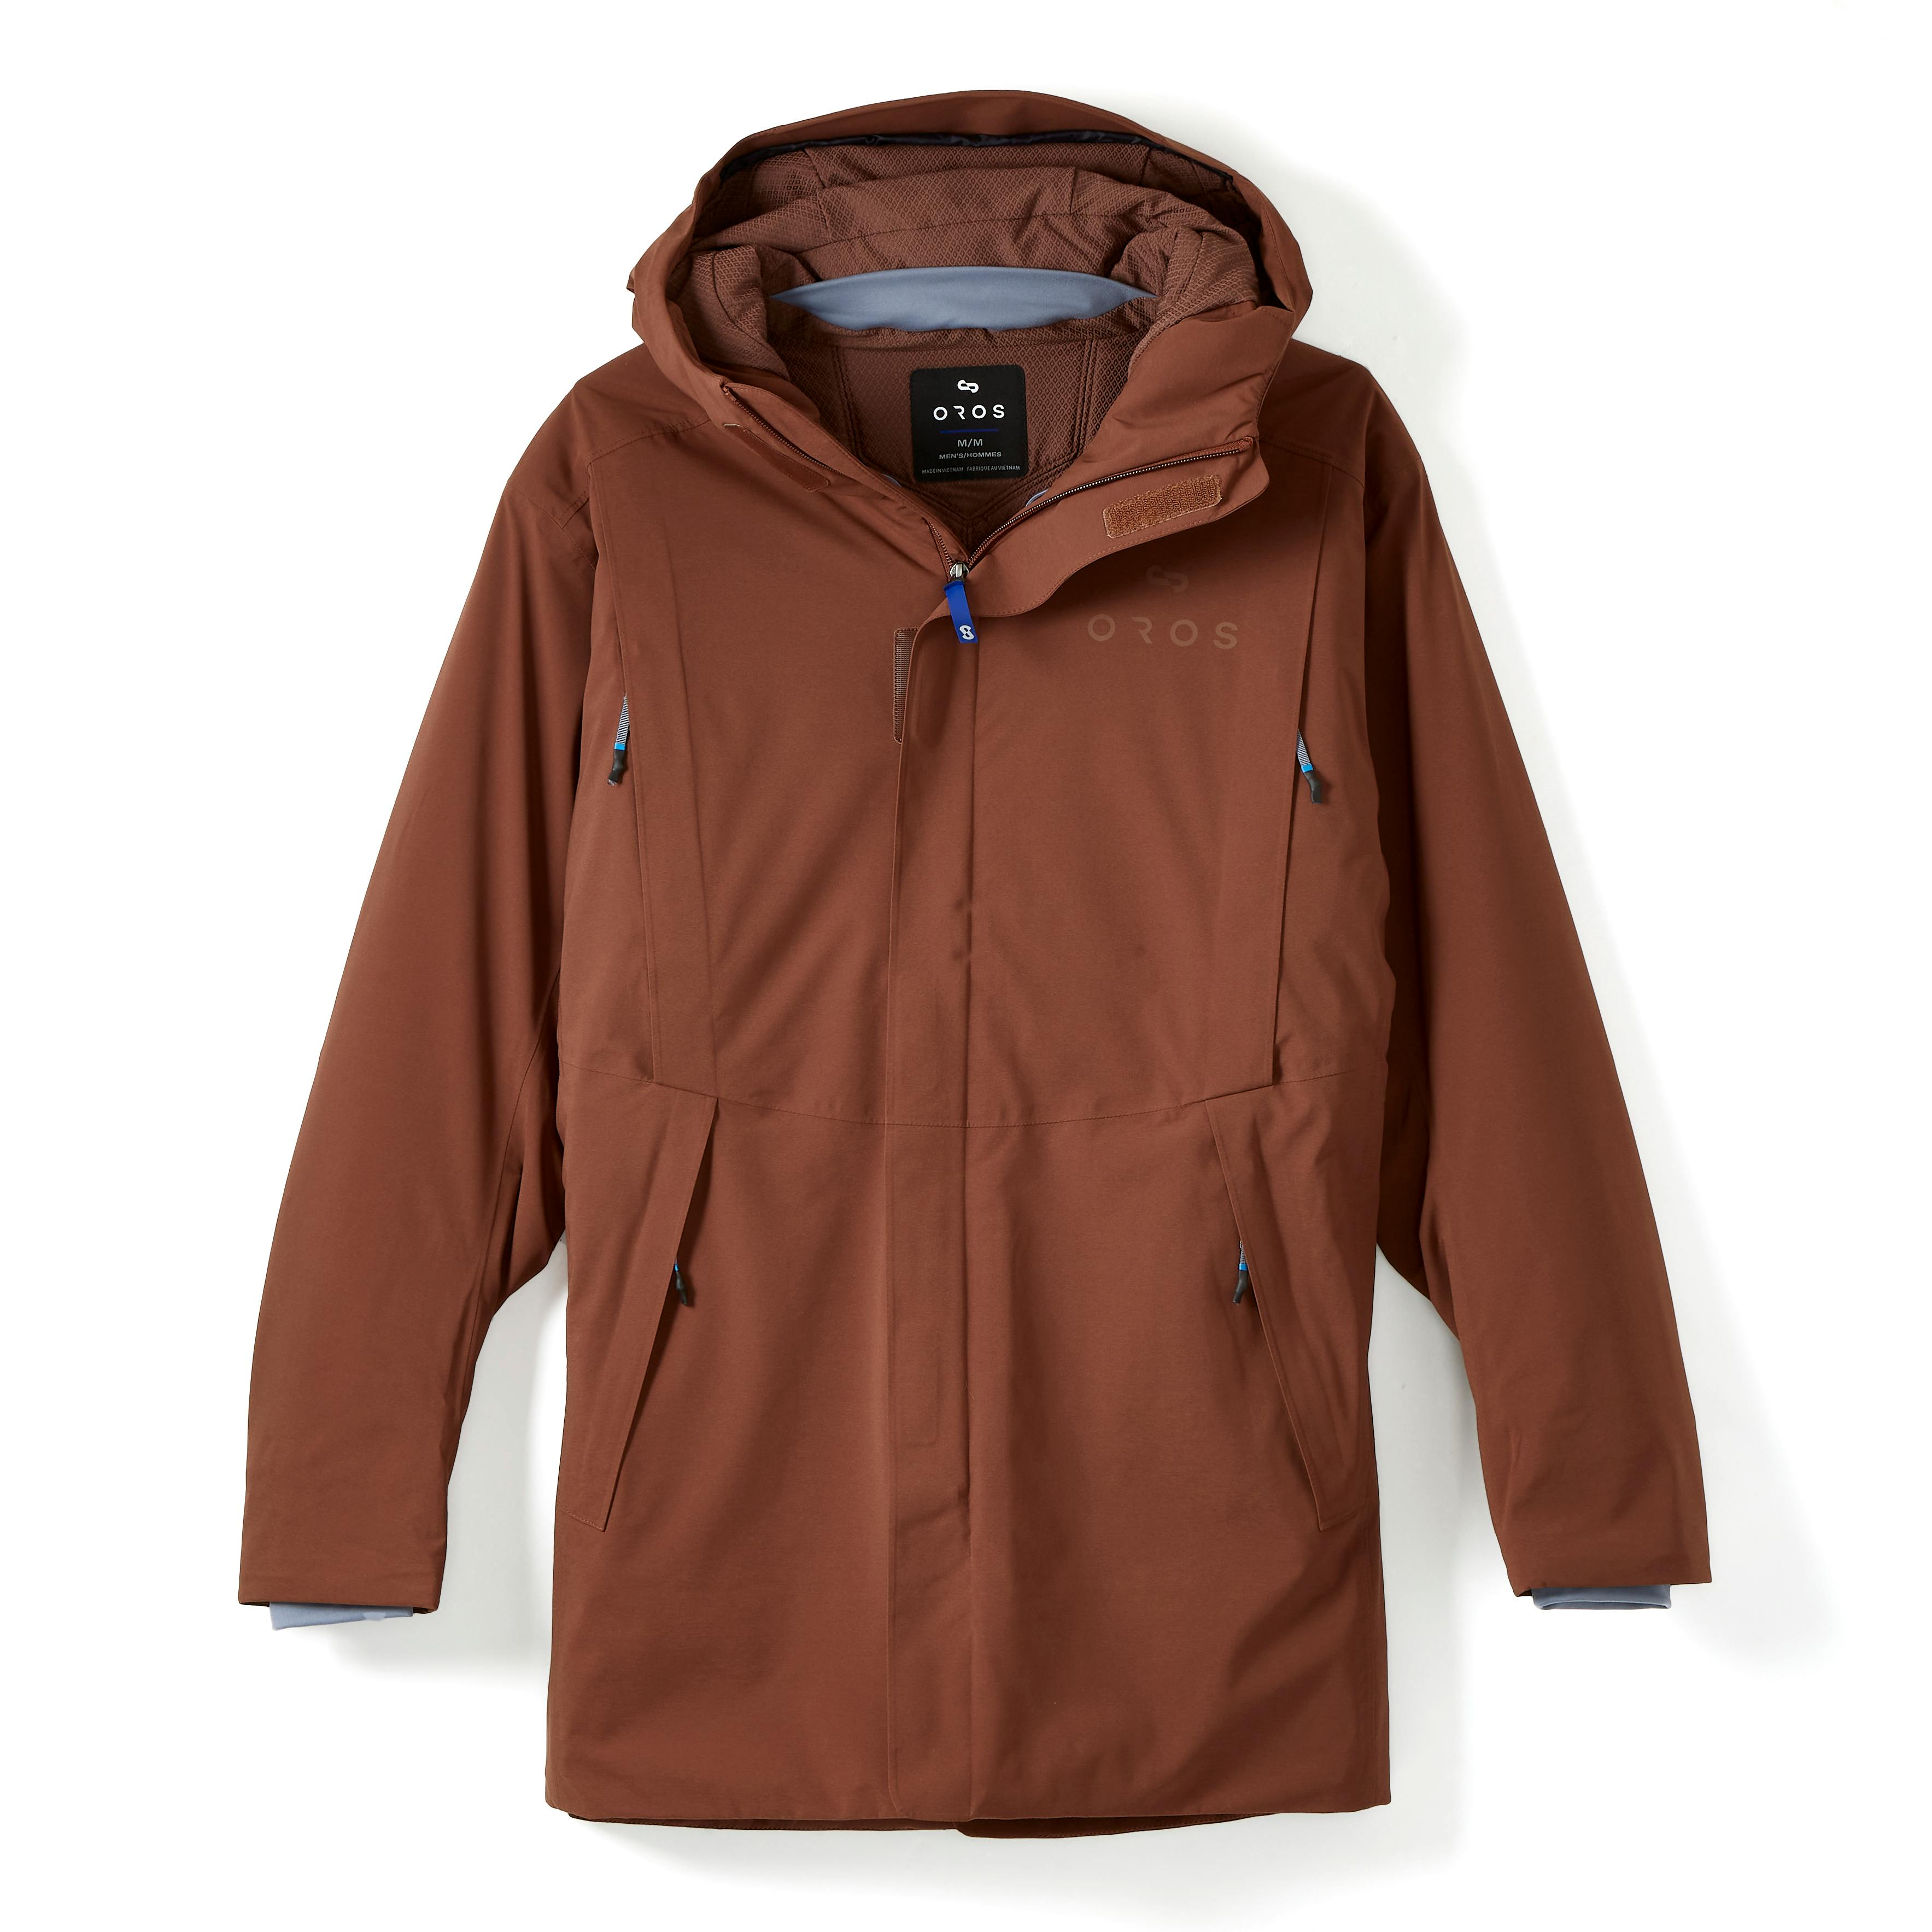 Make an effort Become aware Rainbow Oros Orion Parka - Rich Earth | Winter Jackets | Huckberry